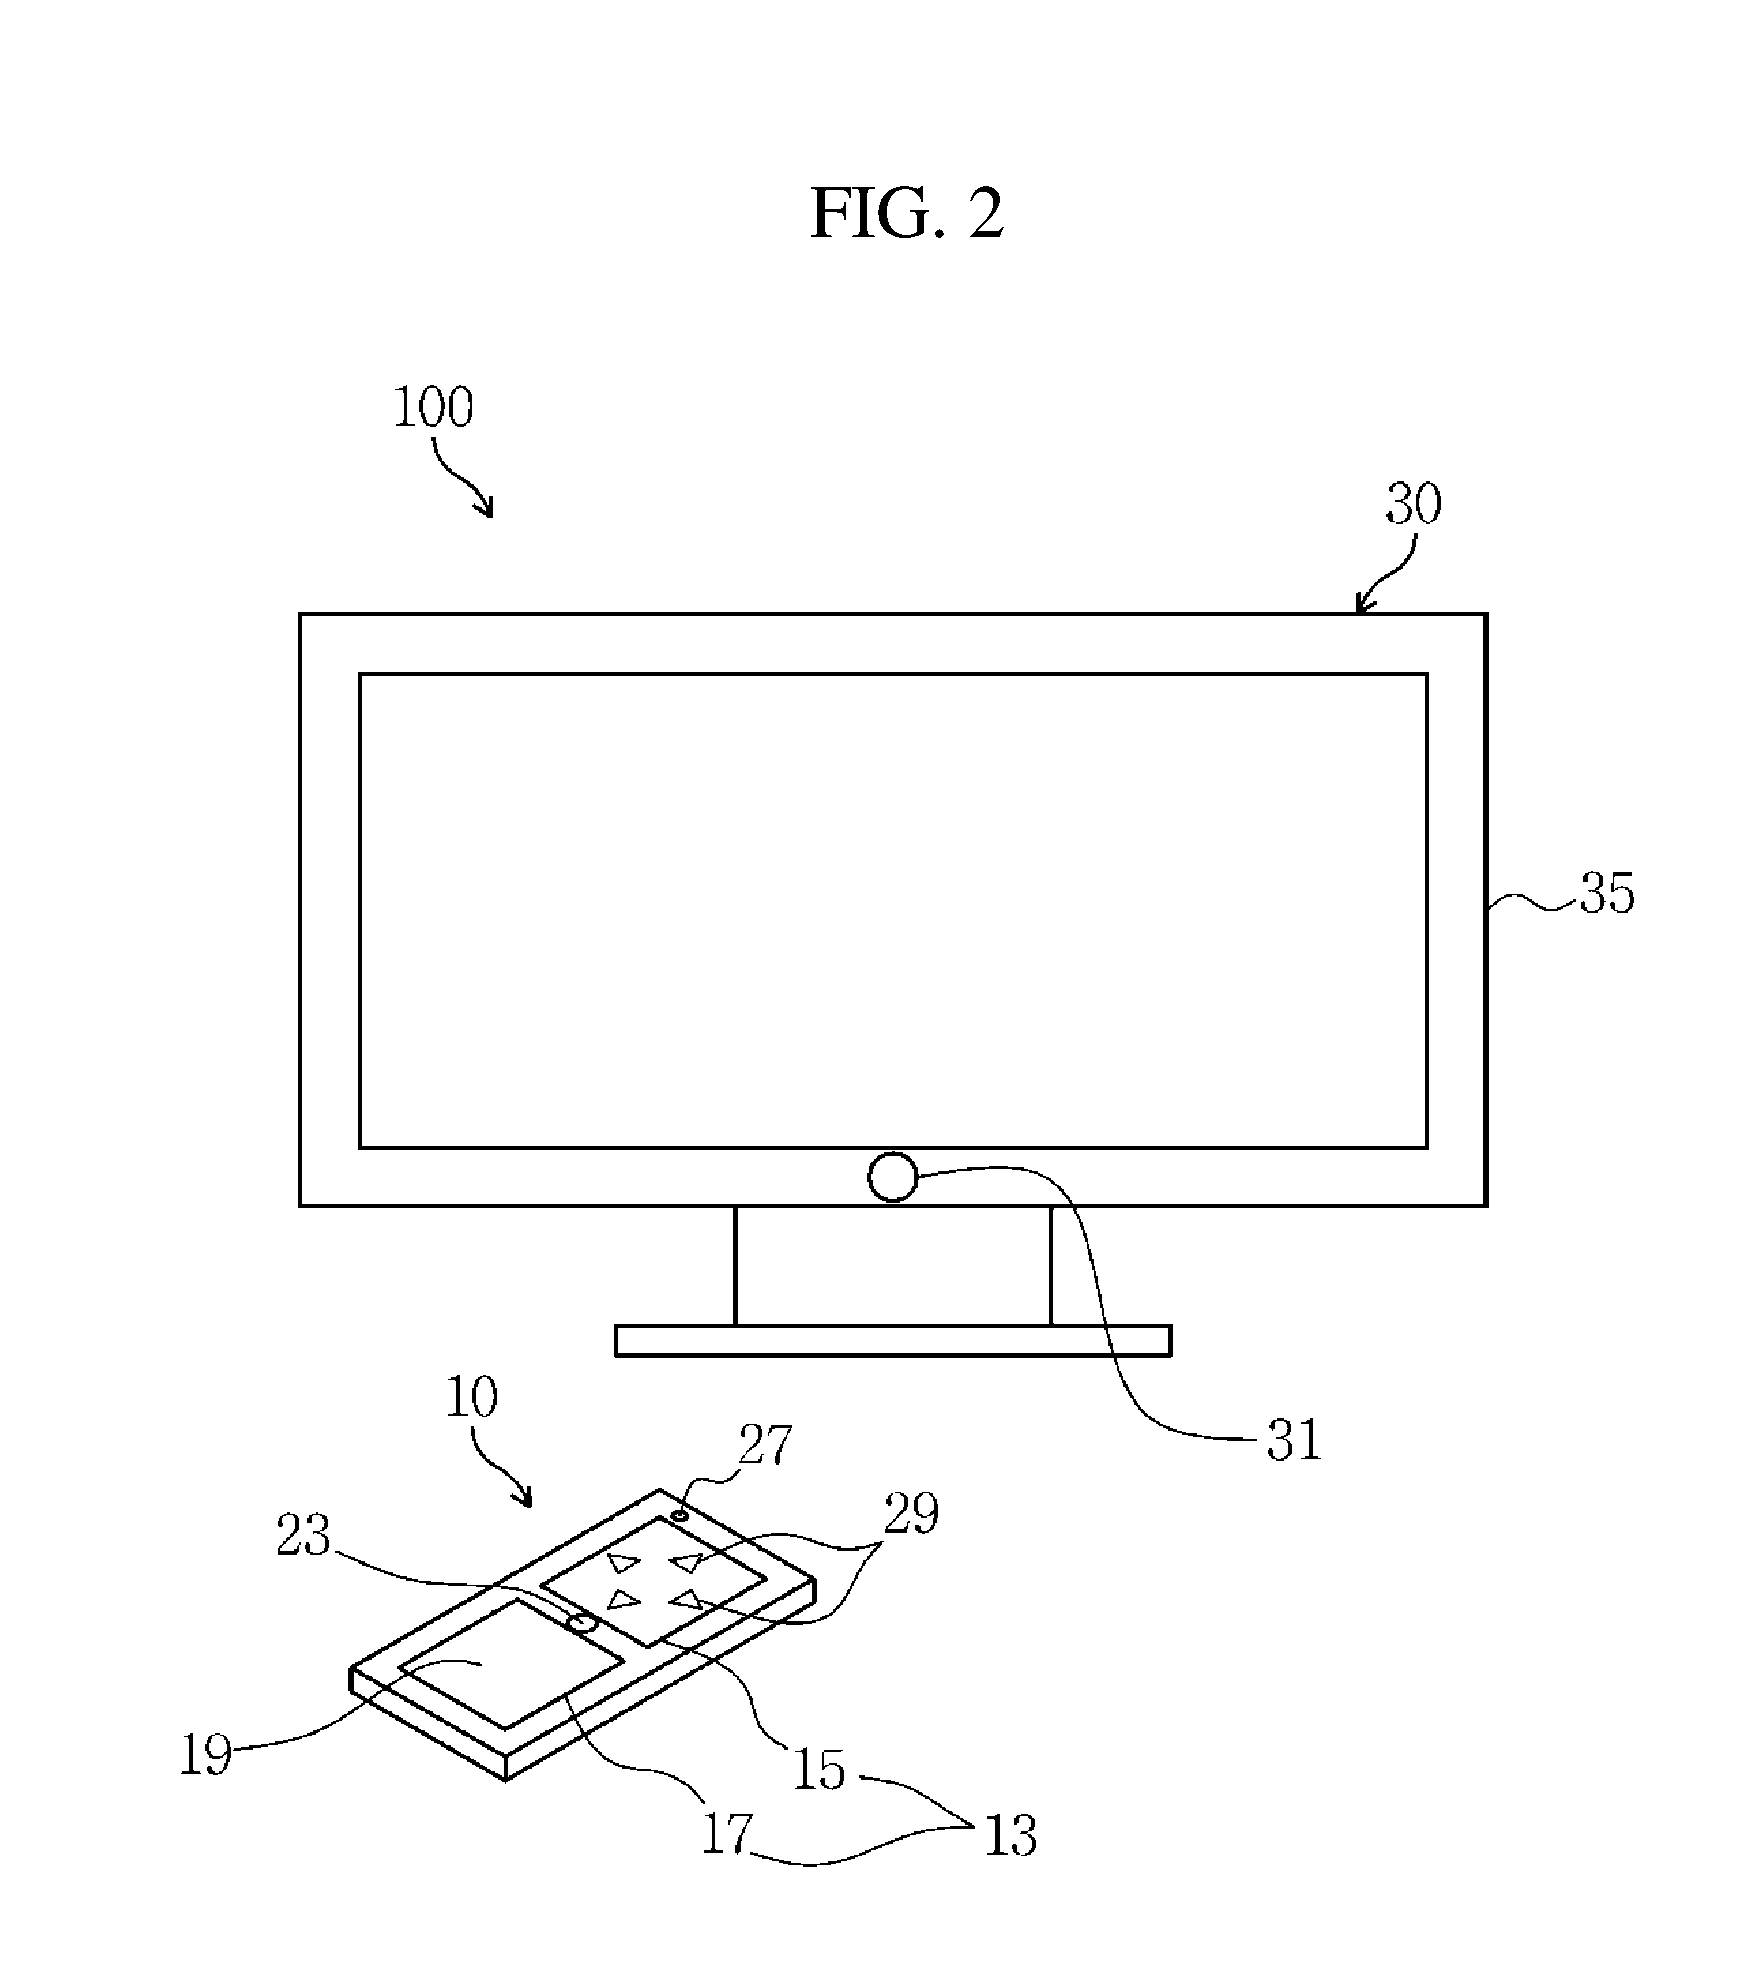 Remote controller having dual touch pads and method of control using the same